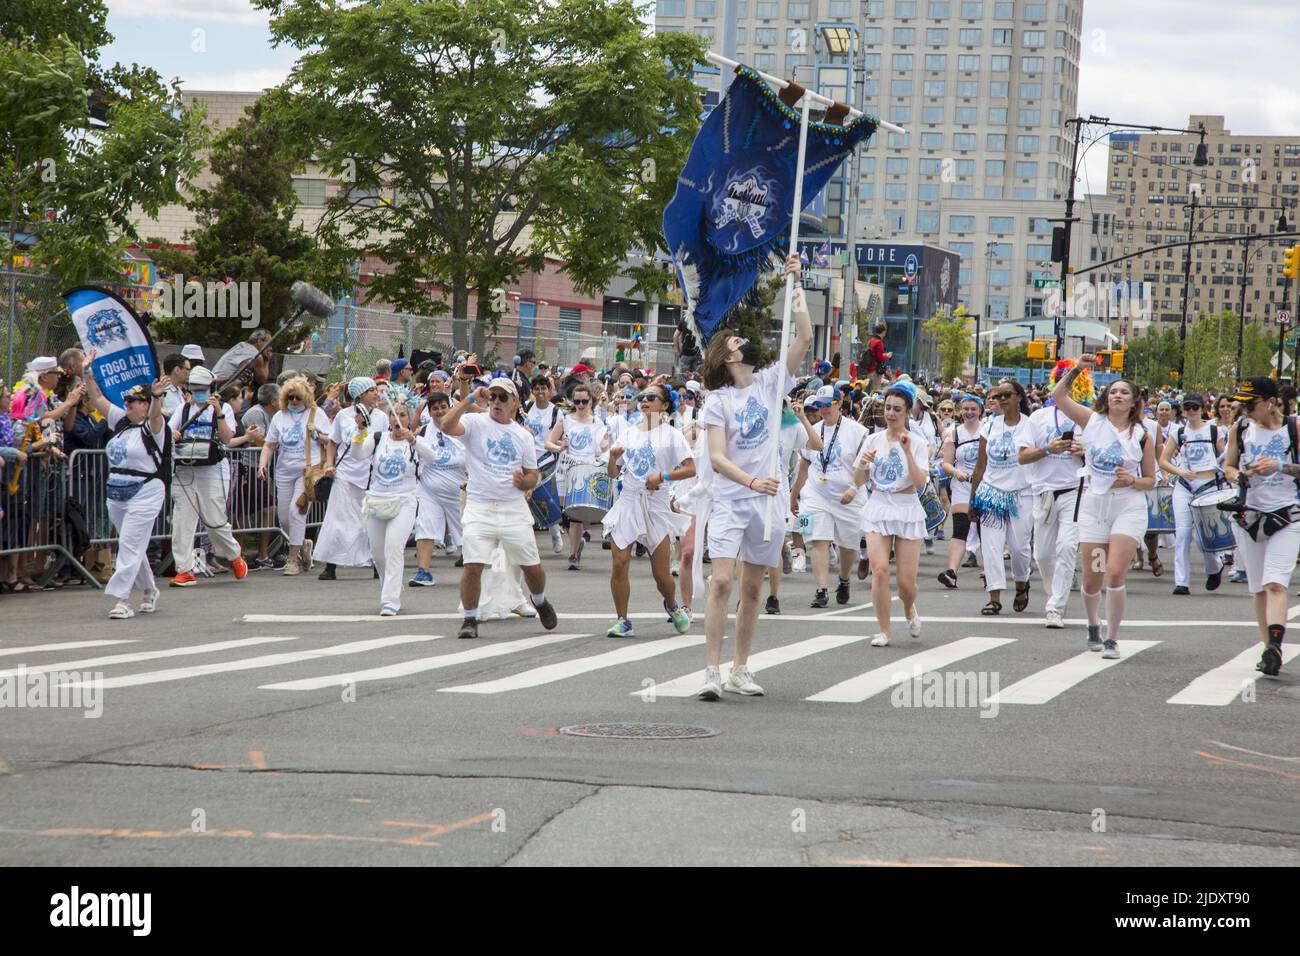 After 2 years from a Covid-19 shutdown, people return to the annual Mermaid Parade, alleged to be the largest art parade in the nation, at Coney Island along Surf Avenue in Brooklyn, New York. Fogo Azul march in full force at the parade. Stock Photo